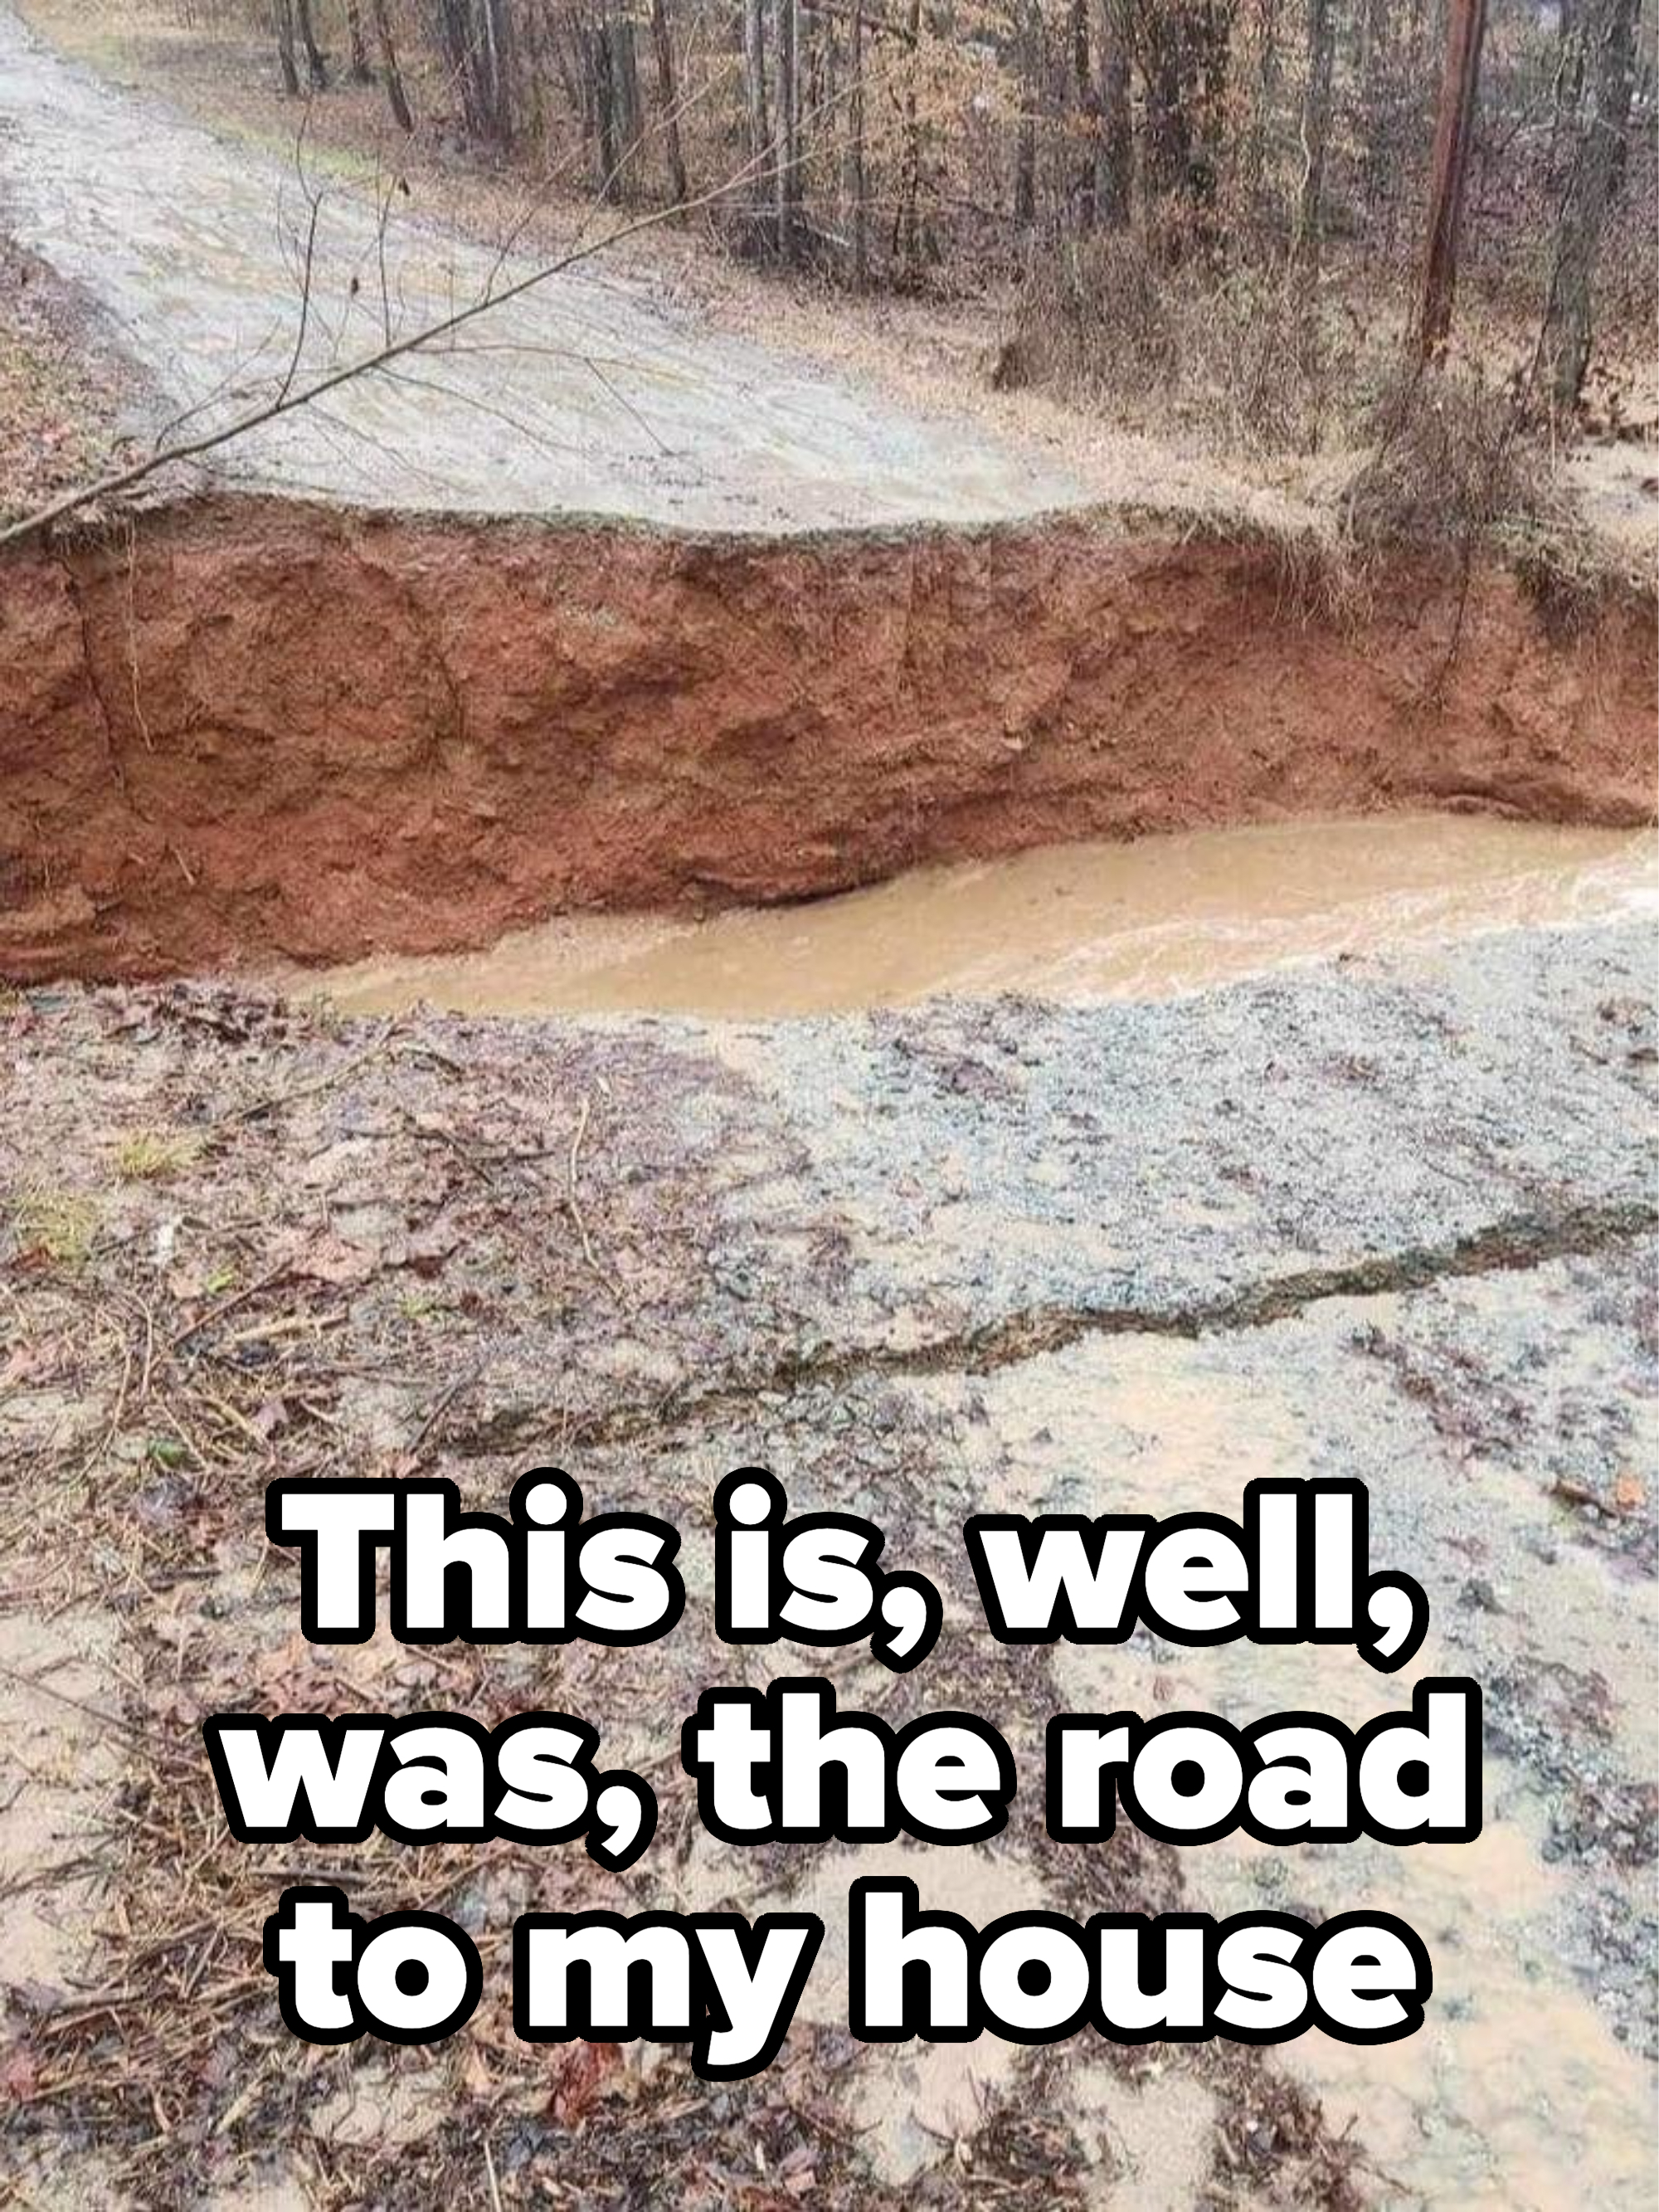 &quot;This is, well, was, the road to my house&quot;: A road that looks split in half with muddy water running across it